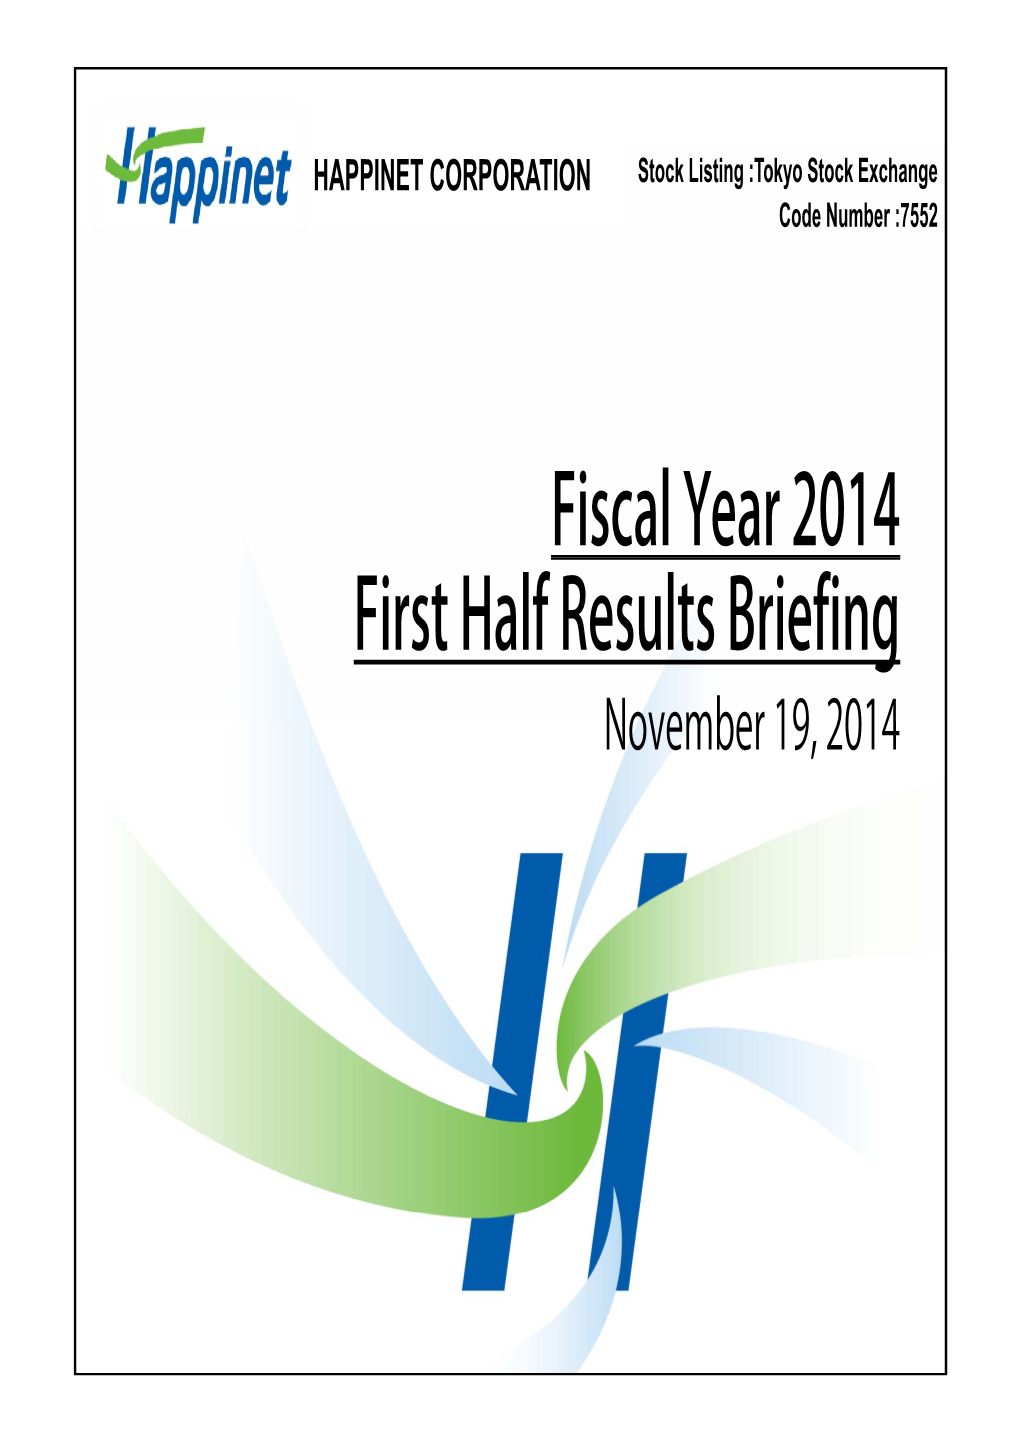 Fiscal Year 2014 First Half Results Briefing November 19, 2014 ⽬次table of Contents